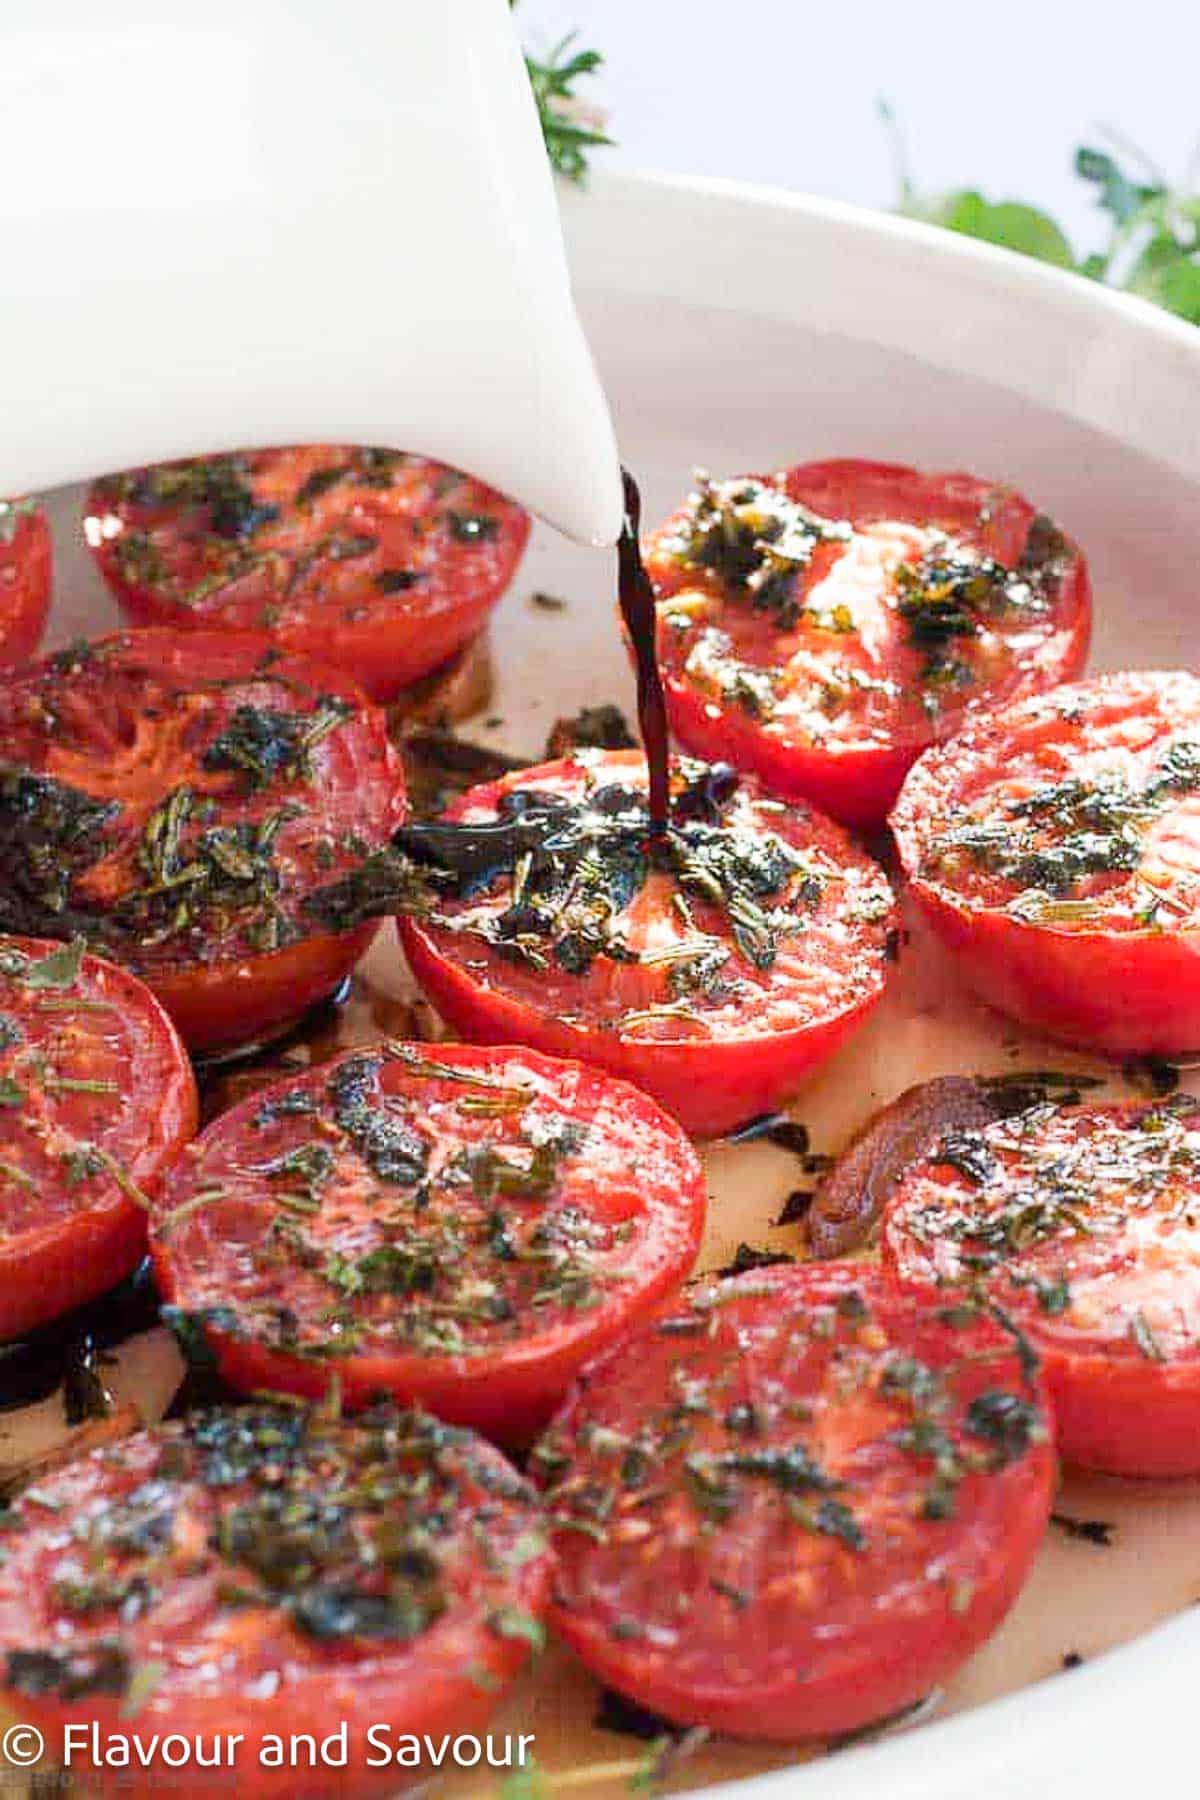 Drizzling balsamic vinegar on broiled tomatoes with herbs and garlic.